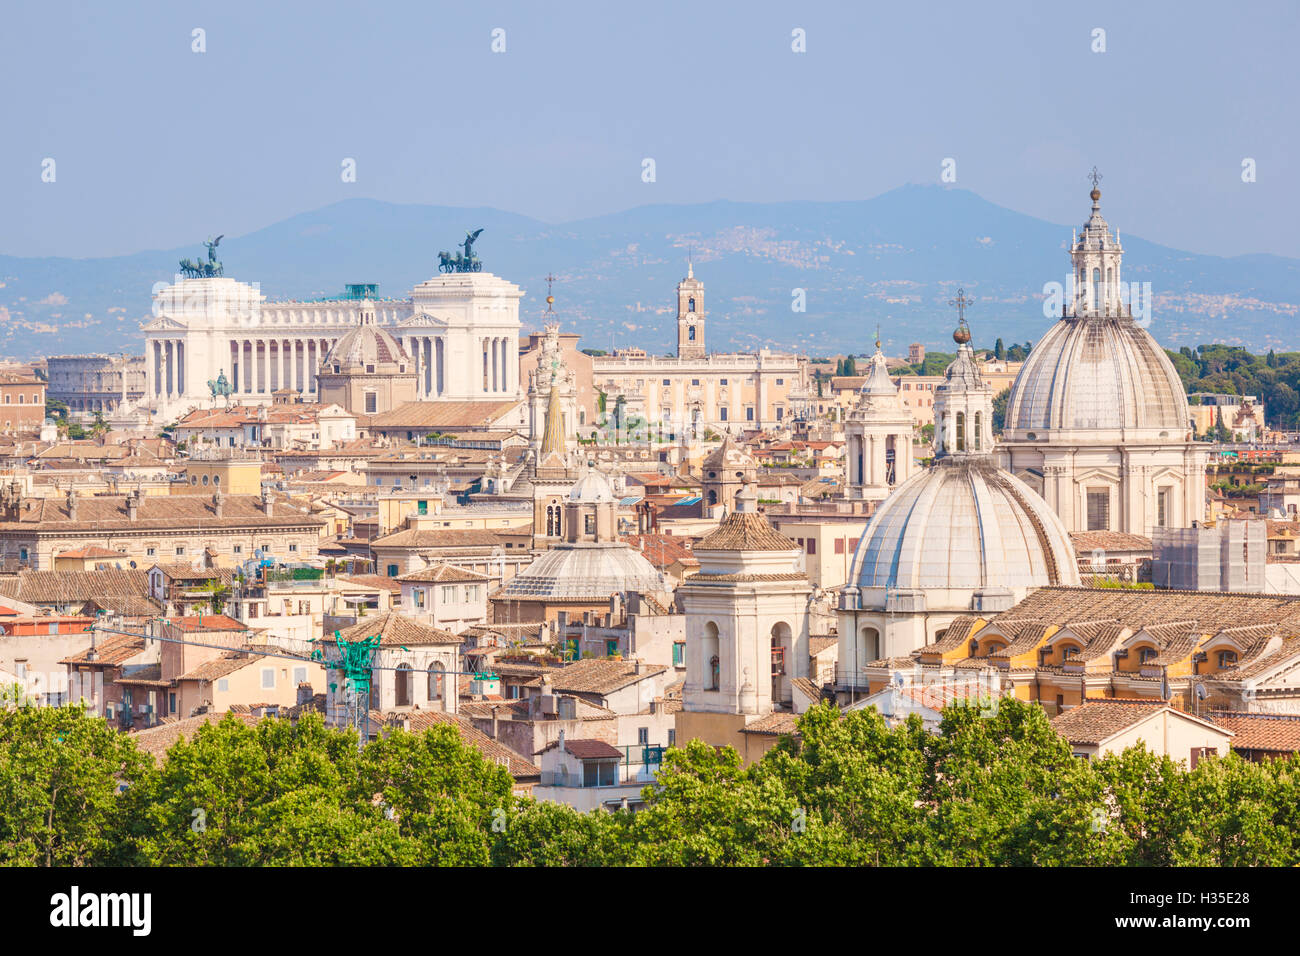 Churches and domes of the Rome skyline showing Victor Emmanuel II monument in the distance, Rome, Lazio, Italy Stock Photo